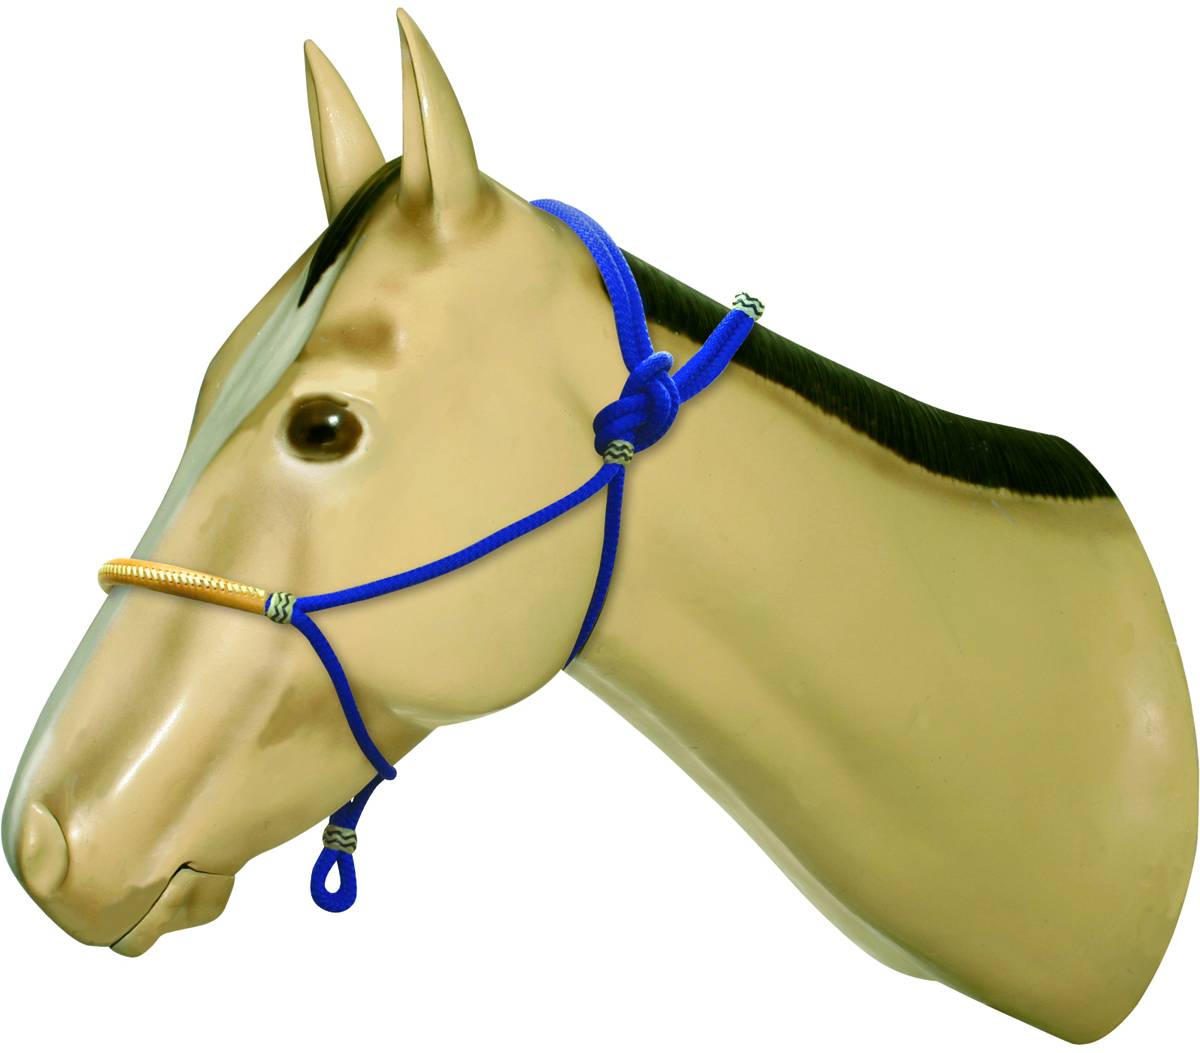 Action Rope Halter With Leather Noseband